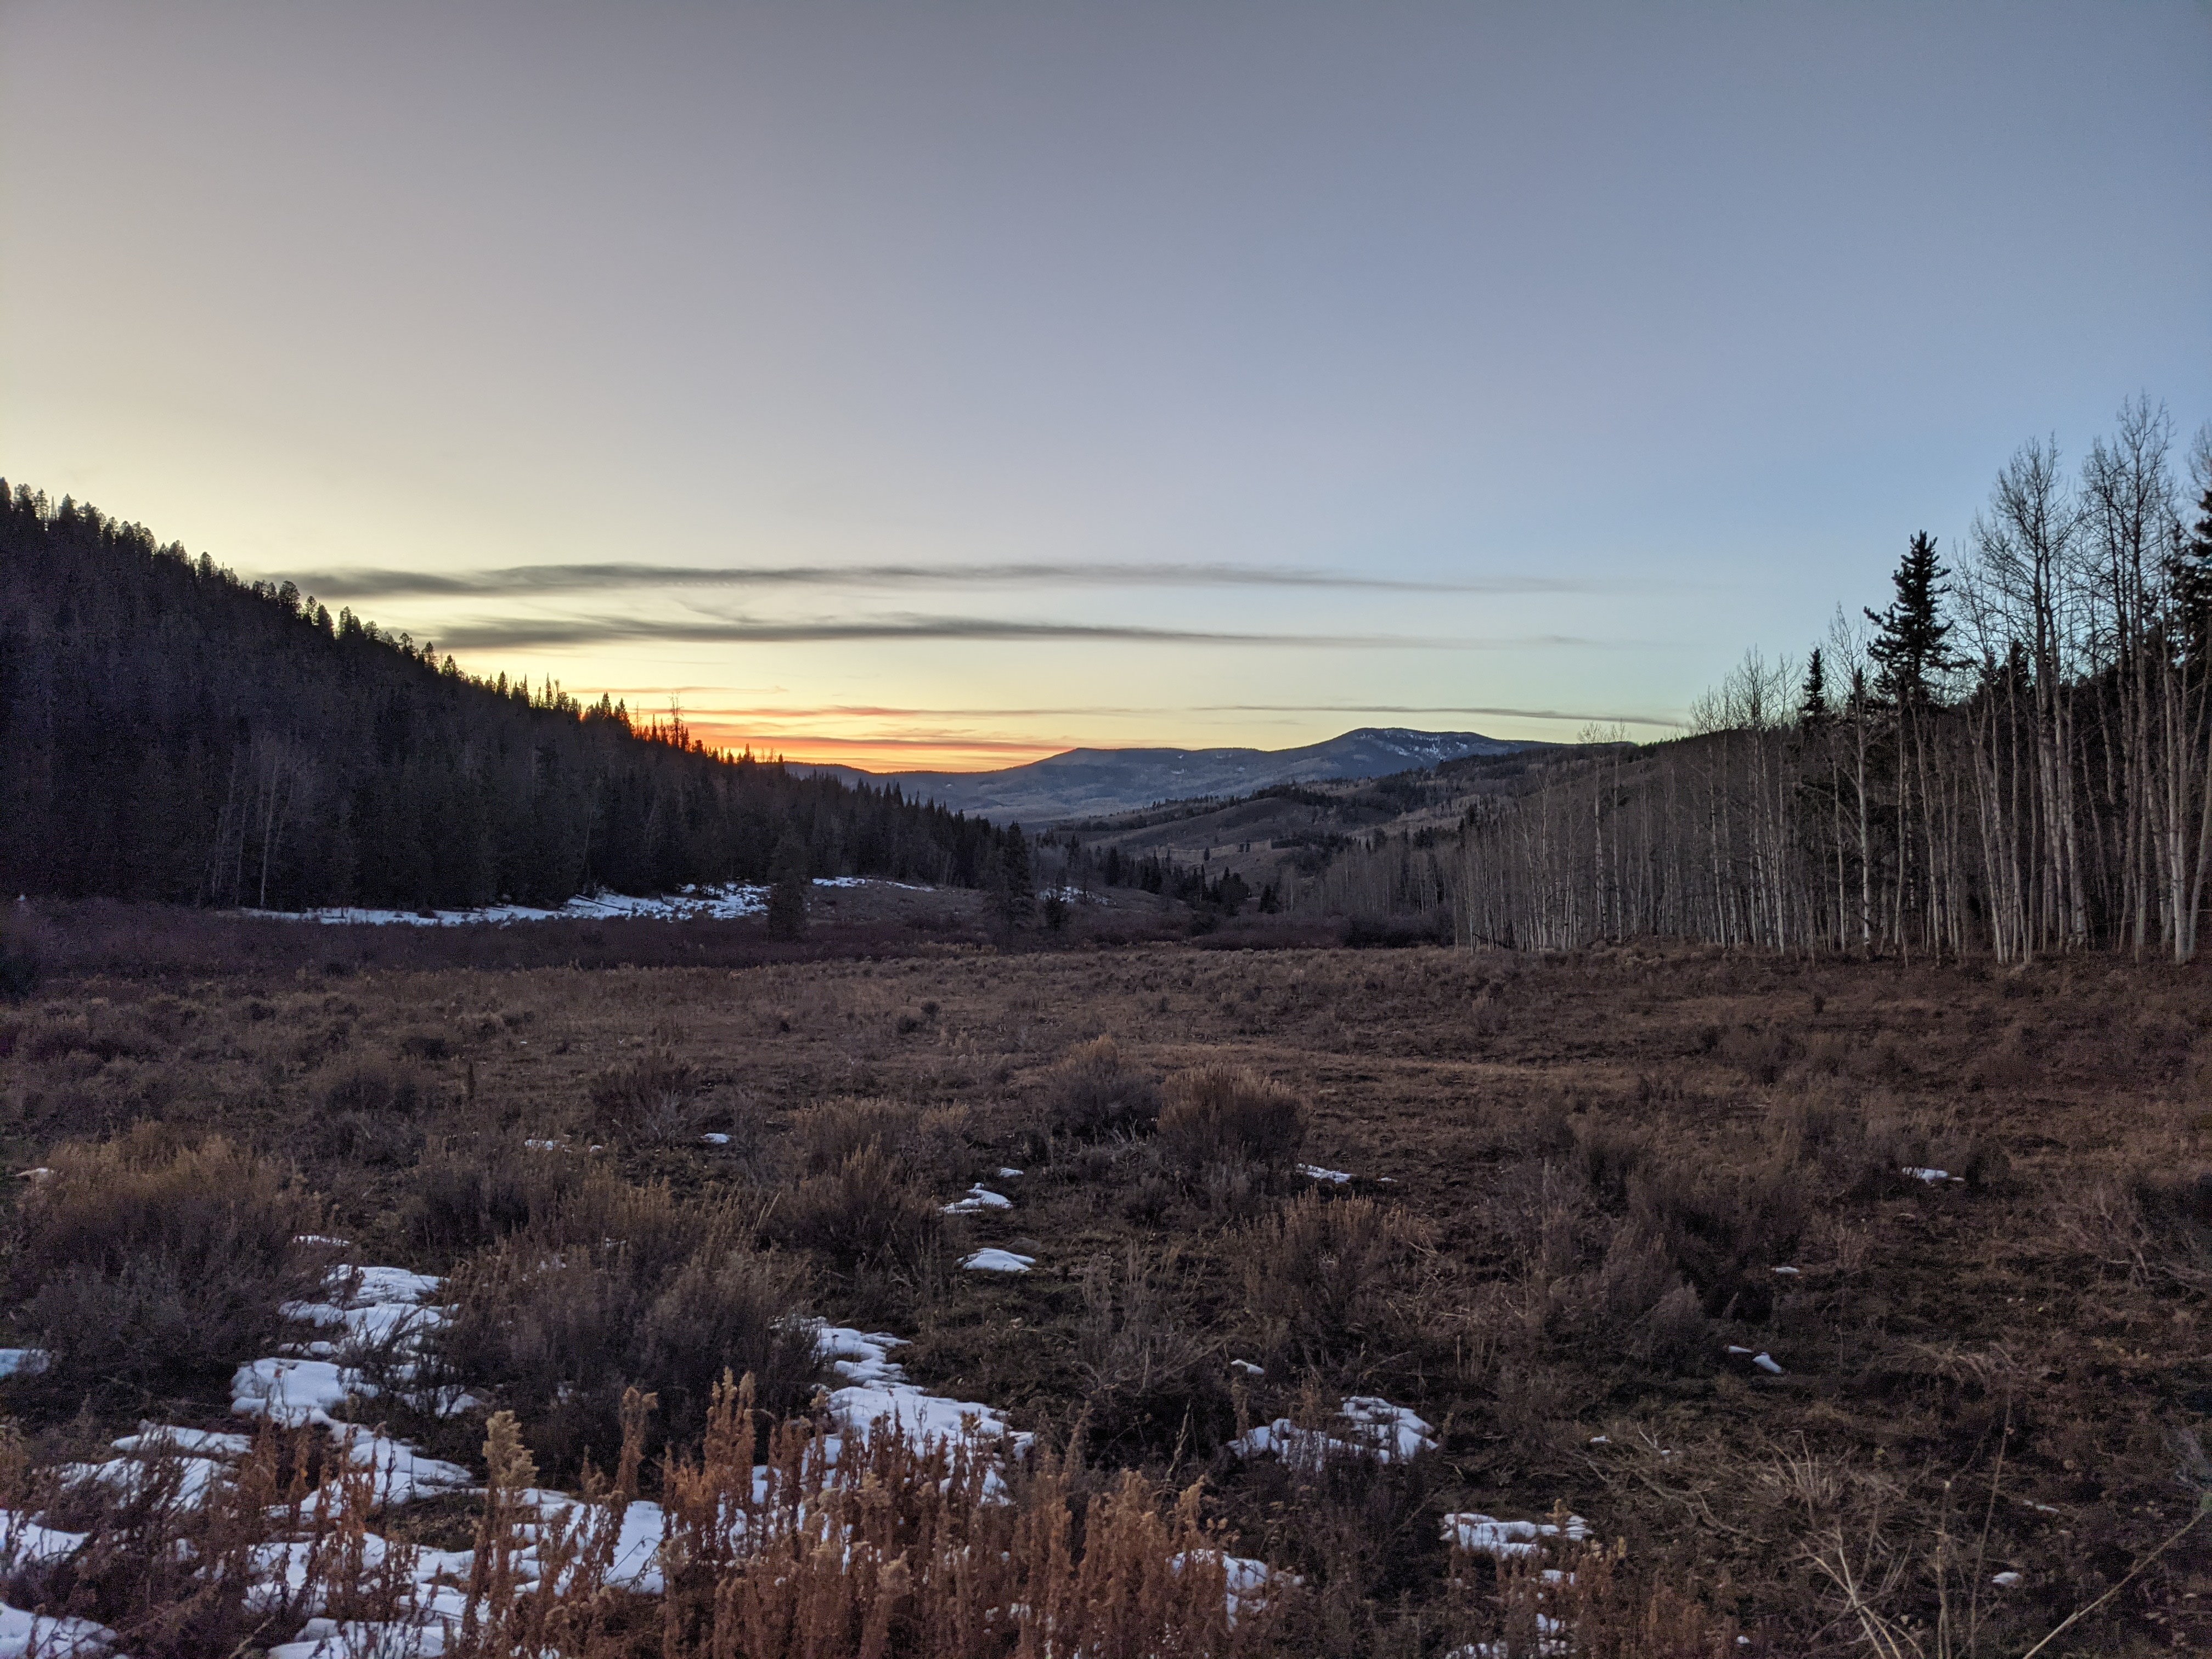 My 2021 Colorado OTC Elk hunt draws to an end with the last sunset.